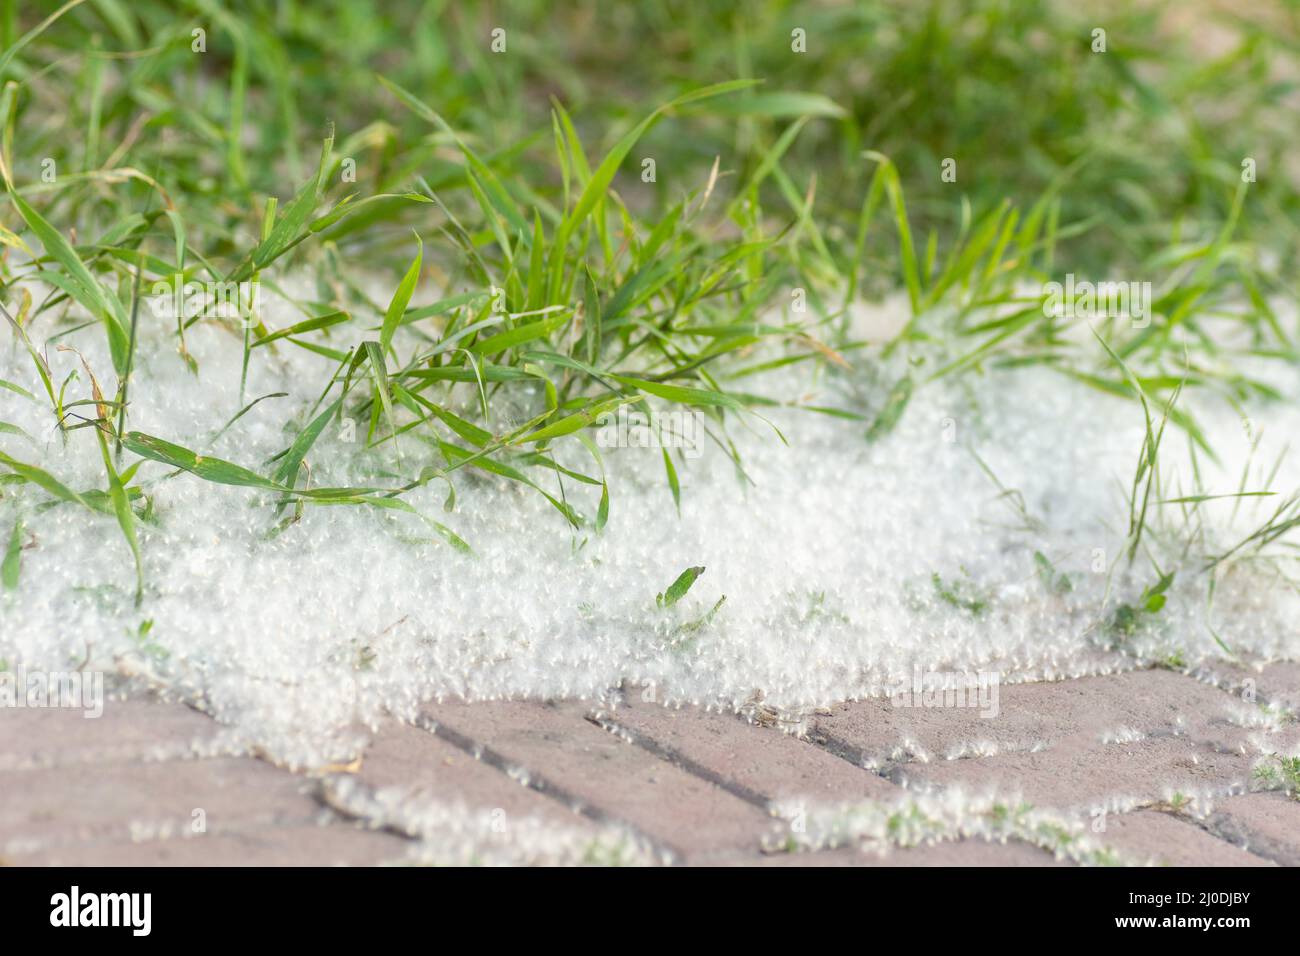 Poplar fluff on the road. Grass in poplar fluff, close-up. Fluffy fluff seeds. Reproduction of trees. Allergy to flowering trees and plants. Stock Photo